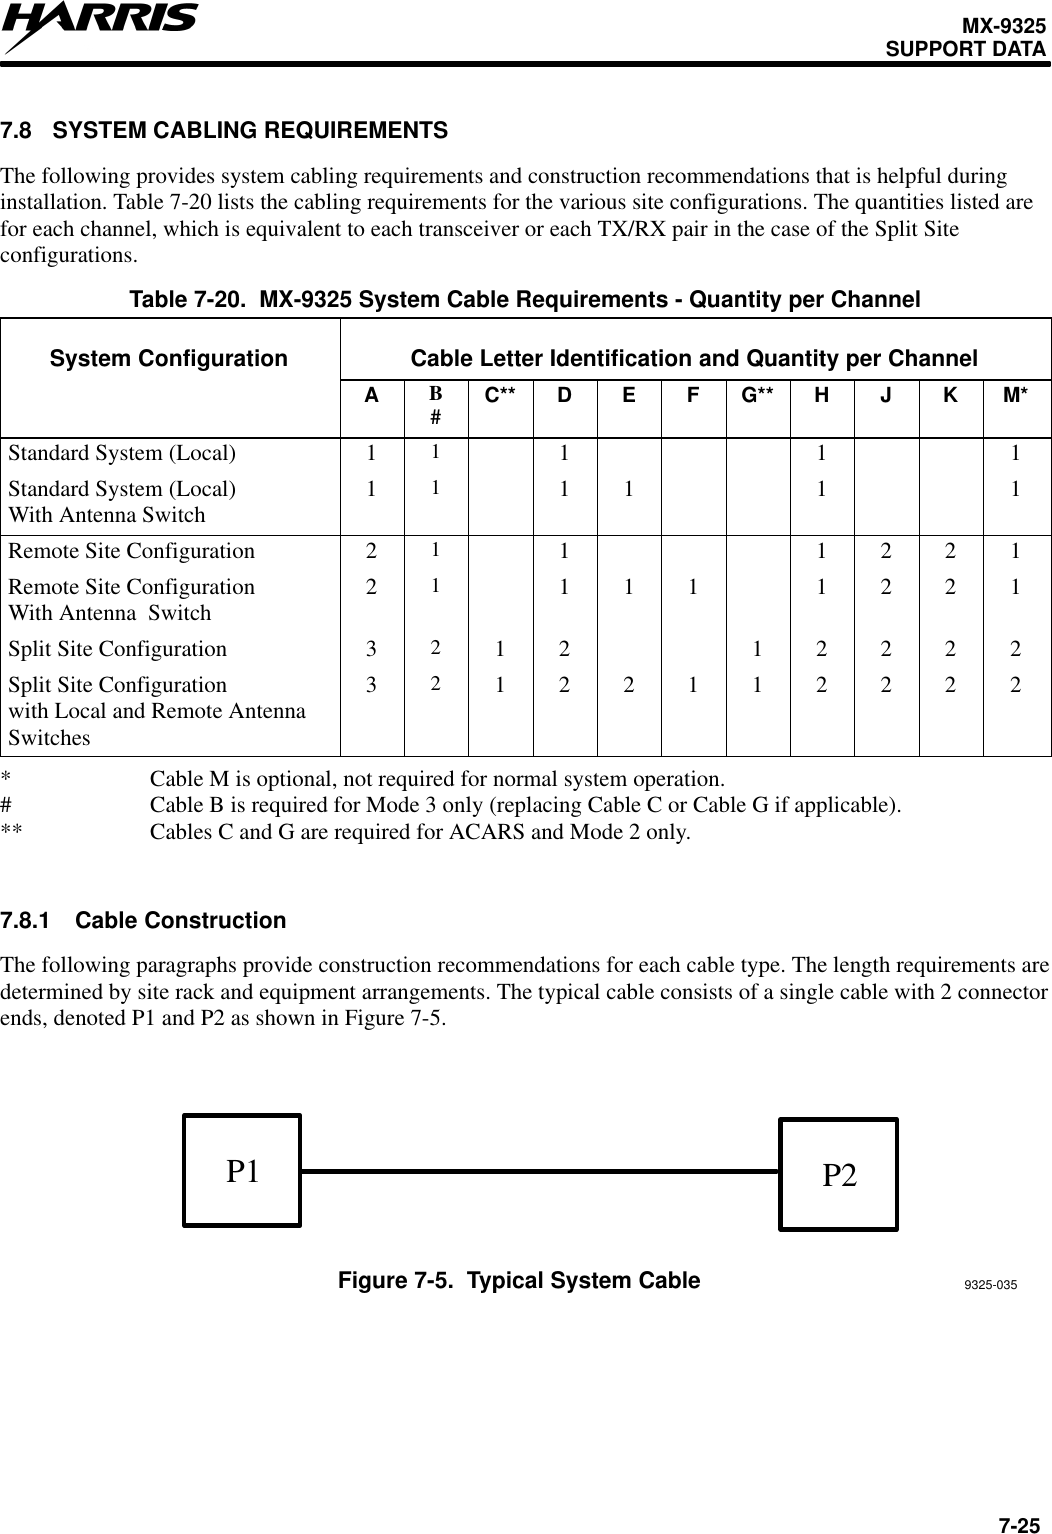 MX-9325SUPPORT DATA7-257.8 SYSTEM CABLING REQUIREMENTSThe following provides system cabling requirements and construction recommendations that is helpful duringinstallation. Table 7-20 lists the cabling requirements for the various site configurations. The quantities listed arefor each channel, which is equivalent to each transceiver or each TX/RX pair in the case of the Split Siteconfigurations.Table 7-20.  MX-9325 System Cable Requirements - Quantity per ChannelSystem Configuration Cable Letter Identification and Quantity per ChannelAB#C** D E F G** H J K M*Standard System (Local) 111 1 1Standard System (Local)With Antenna Switch 111 1 1 1Remote Site Configuration 211 1 2 2 1Remote Site ConfigurationWith Antenna  Switch 211 1 1 1 2 2 1Split Site Configuration 321 2 1 2 2 2 2Split Site Configurationwith Local and Remote AntennaSwitches321 2 2 1 1 2 2 2 2* Cable M is optional, not required for normal system operation.# Cable B is required for Mode 3 only (replacing Cable C or Cable G if applicable).** Cables C and G are required for ACARS and Mode 2 only.7.8.1 Cable ConstructionThe following paragraphs provide construction recommendations for each cable type. The length requirements aredetermined by site rack and equipment arrangements. The typical cable consists of a single cable with 2 connectorends, denoted P1 and P2 as shown in Figure 7-5.Figure 7-5.  Typical System CableP1 P29325-035